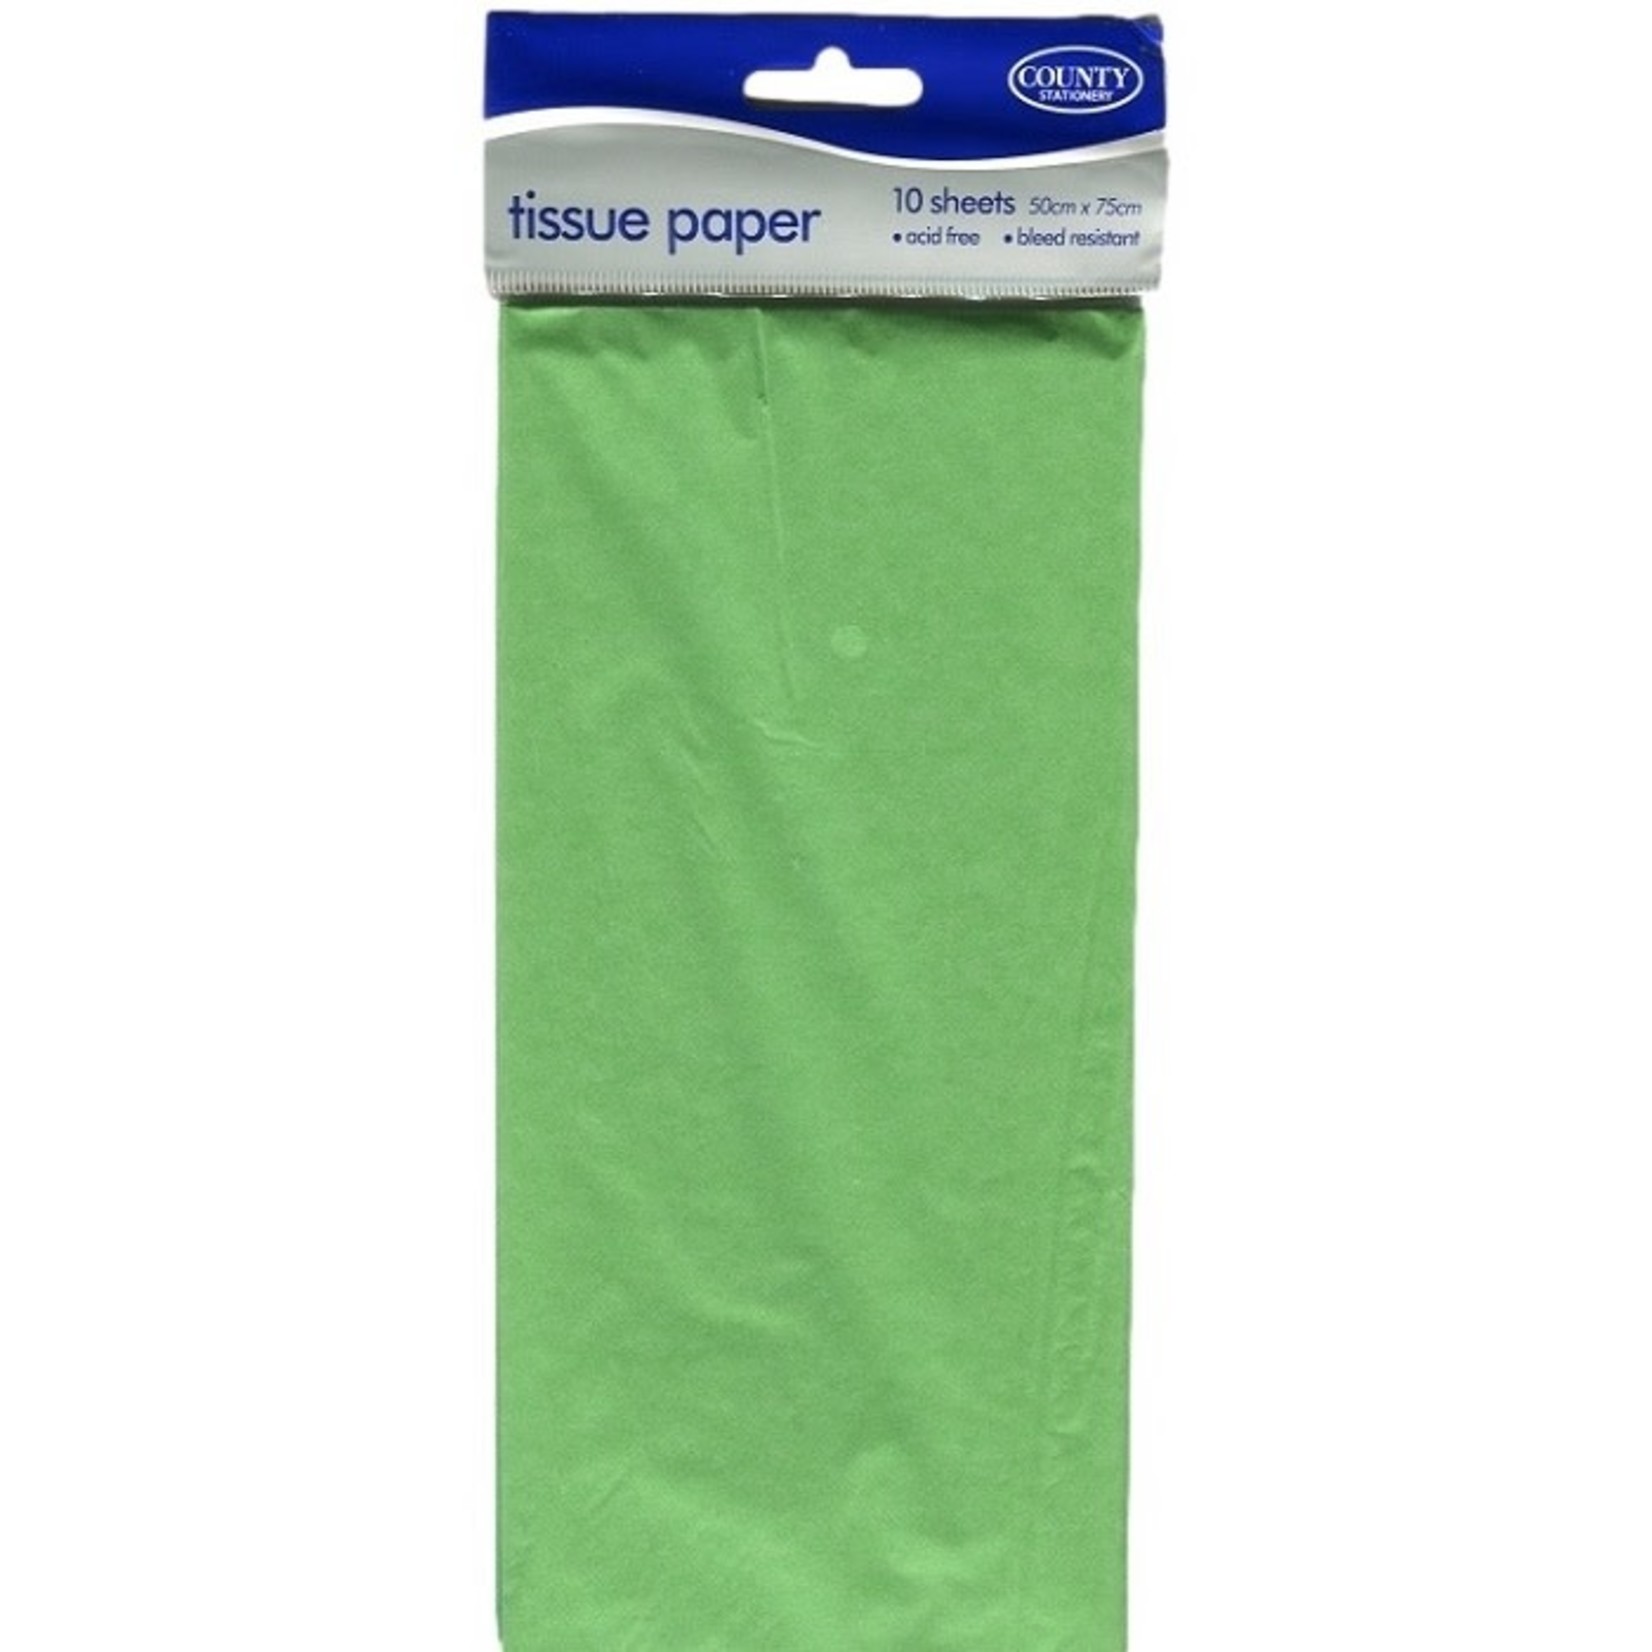 County Stationery Tissue Paper - Light Green - 10 sheets